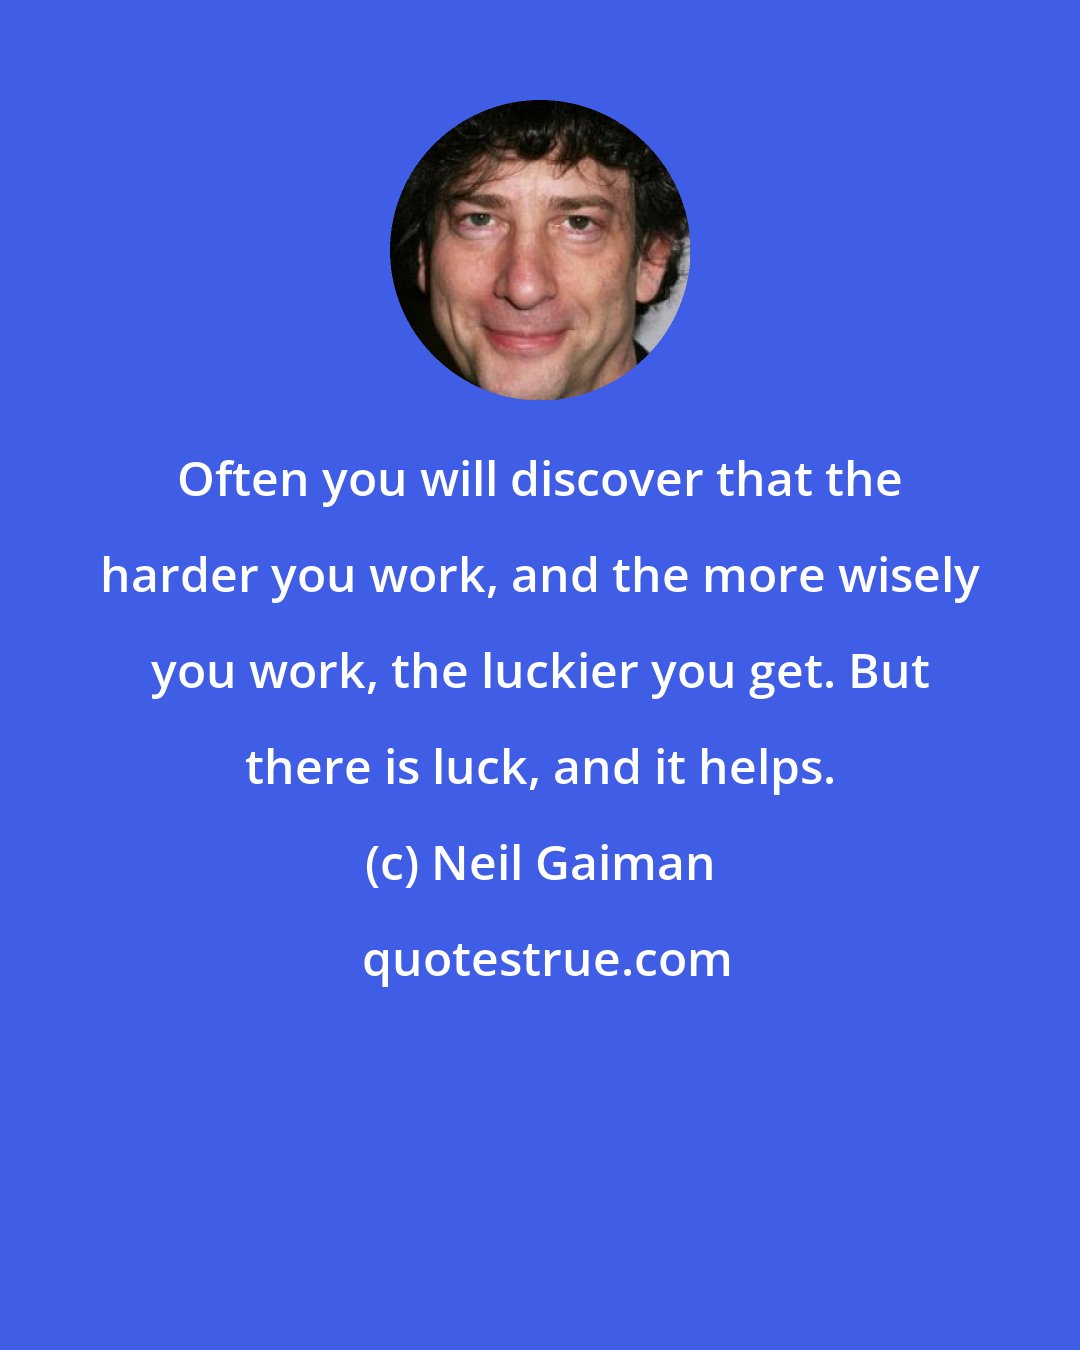 Neil Gaiman: Often you will discover that the harder you work, and the more wisely you work, the luckier you get. But there is luck, and it helps.